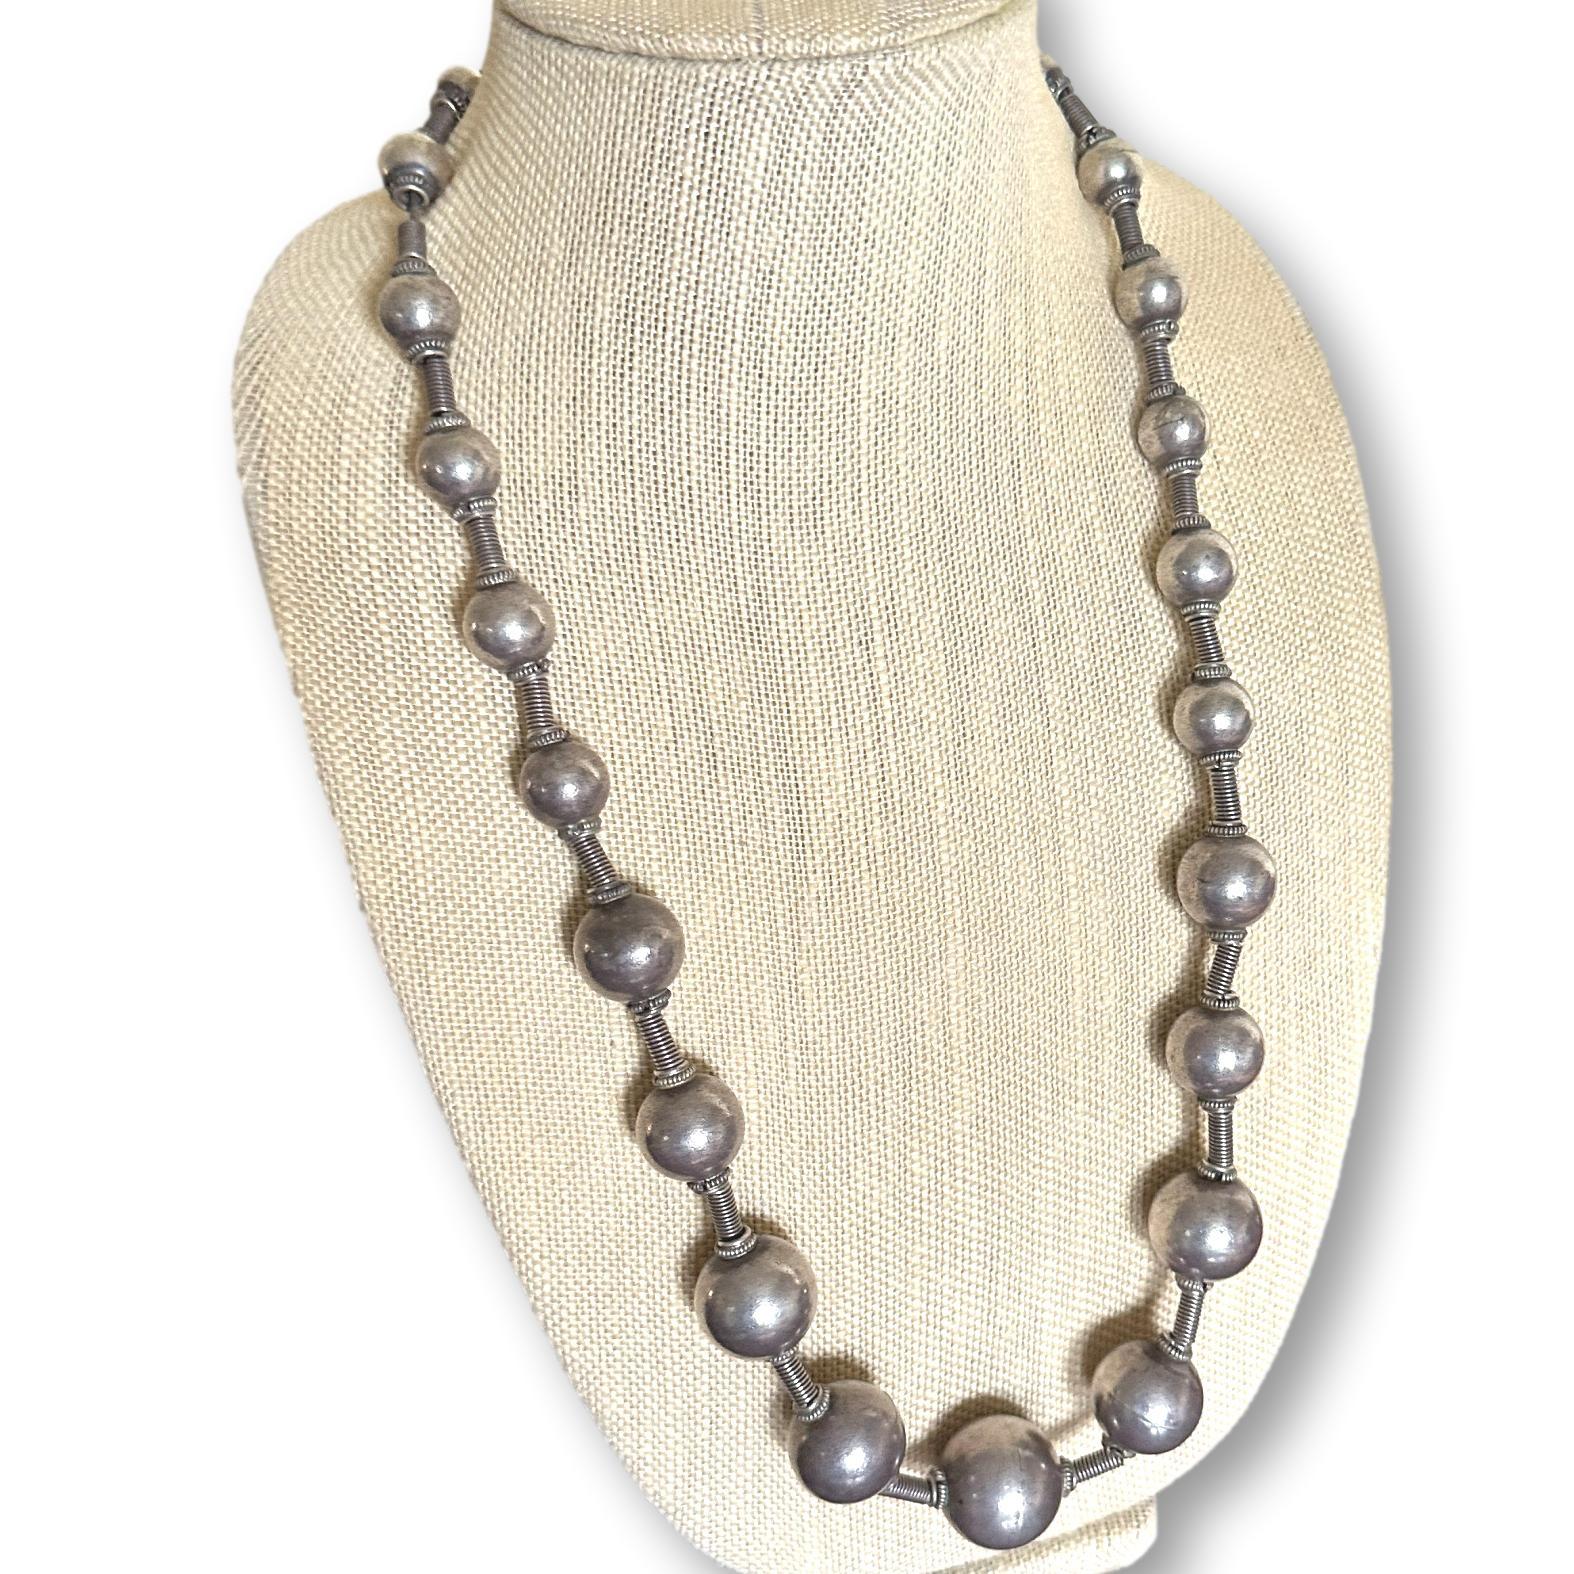 Vintage Tribal Silver Alloy Necklace